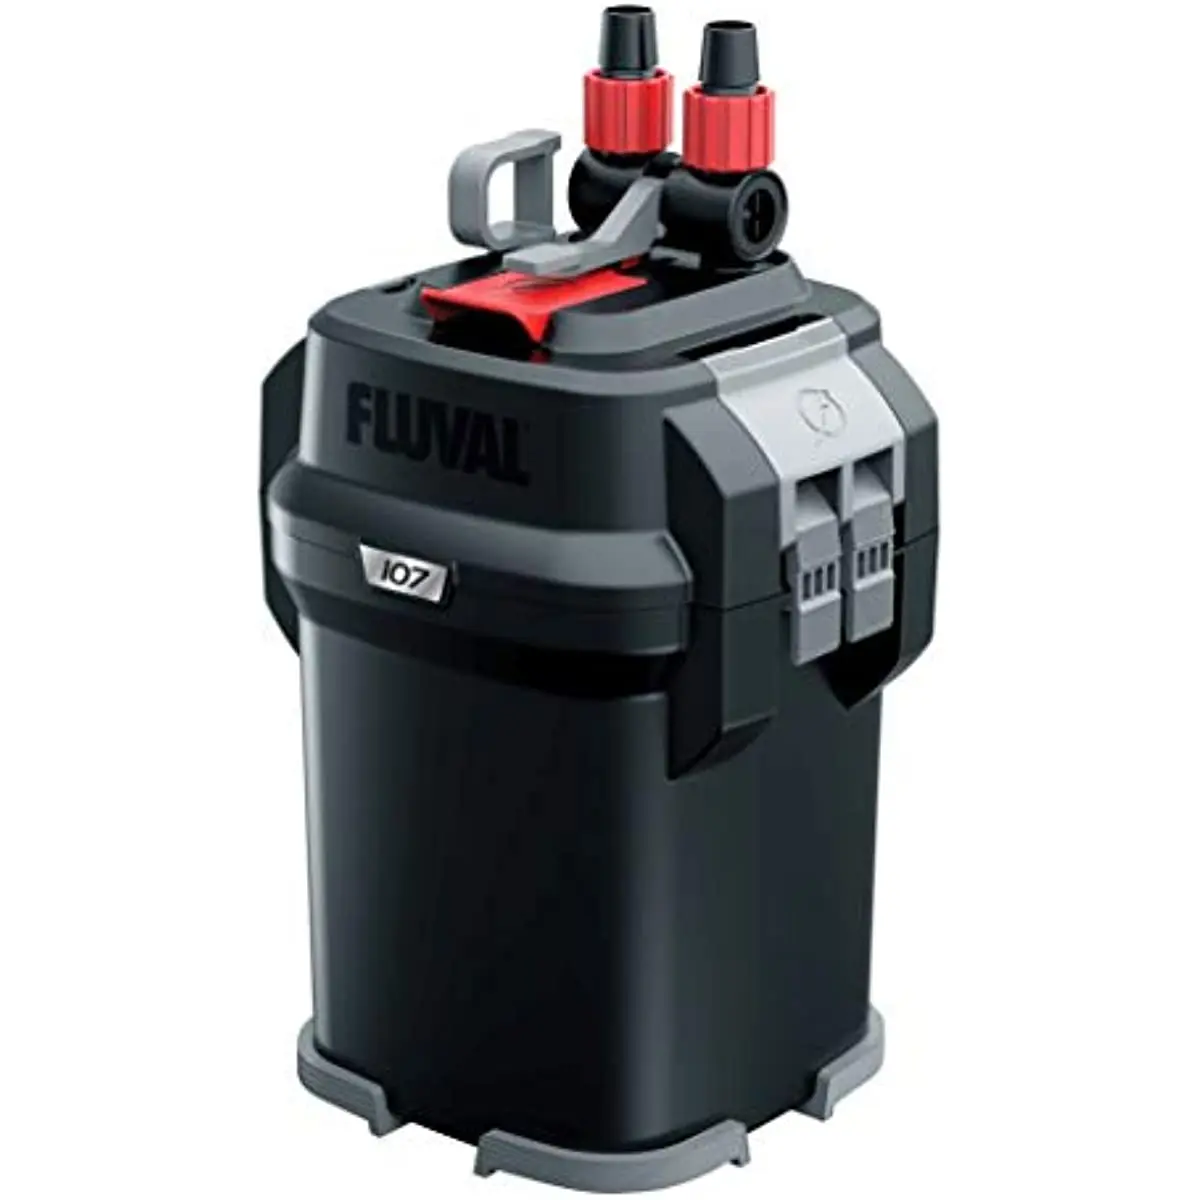 

Fluval 107 Perfomance Canister Filter for Aquariums up to 30 Gallons